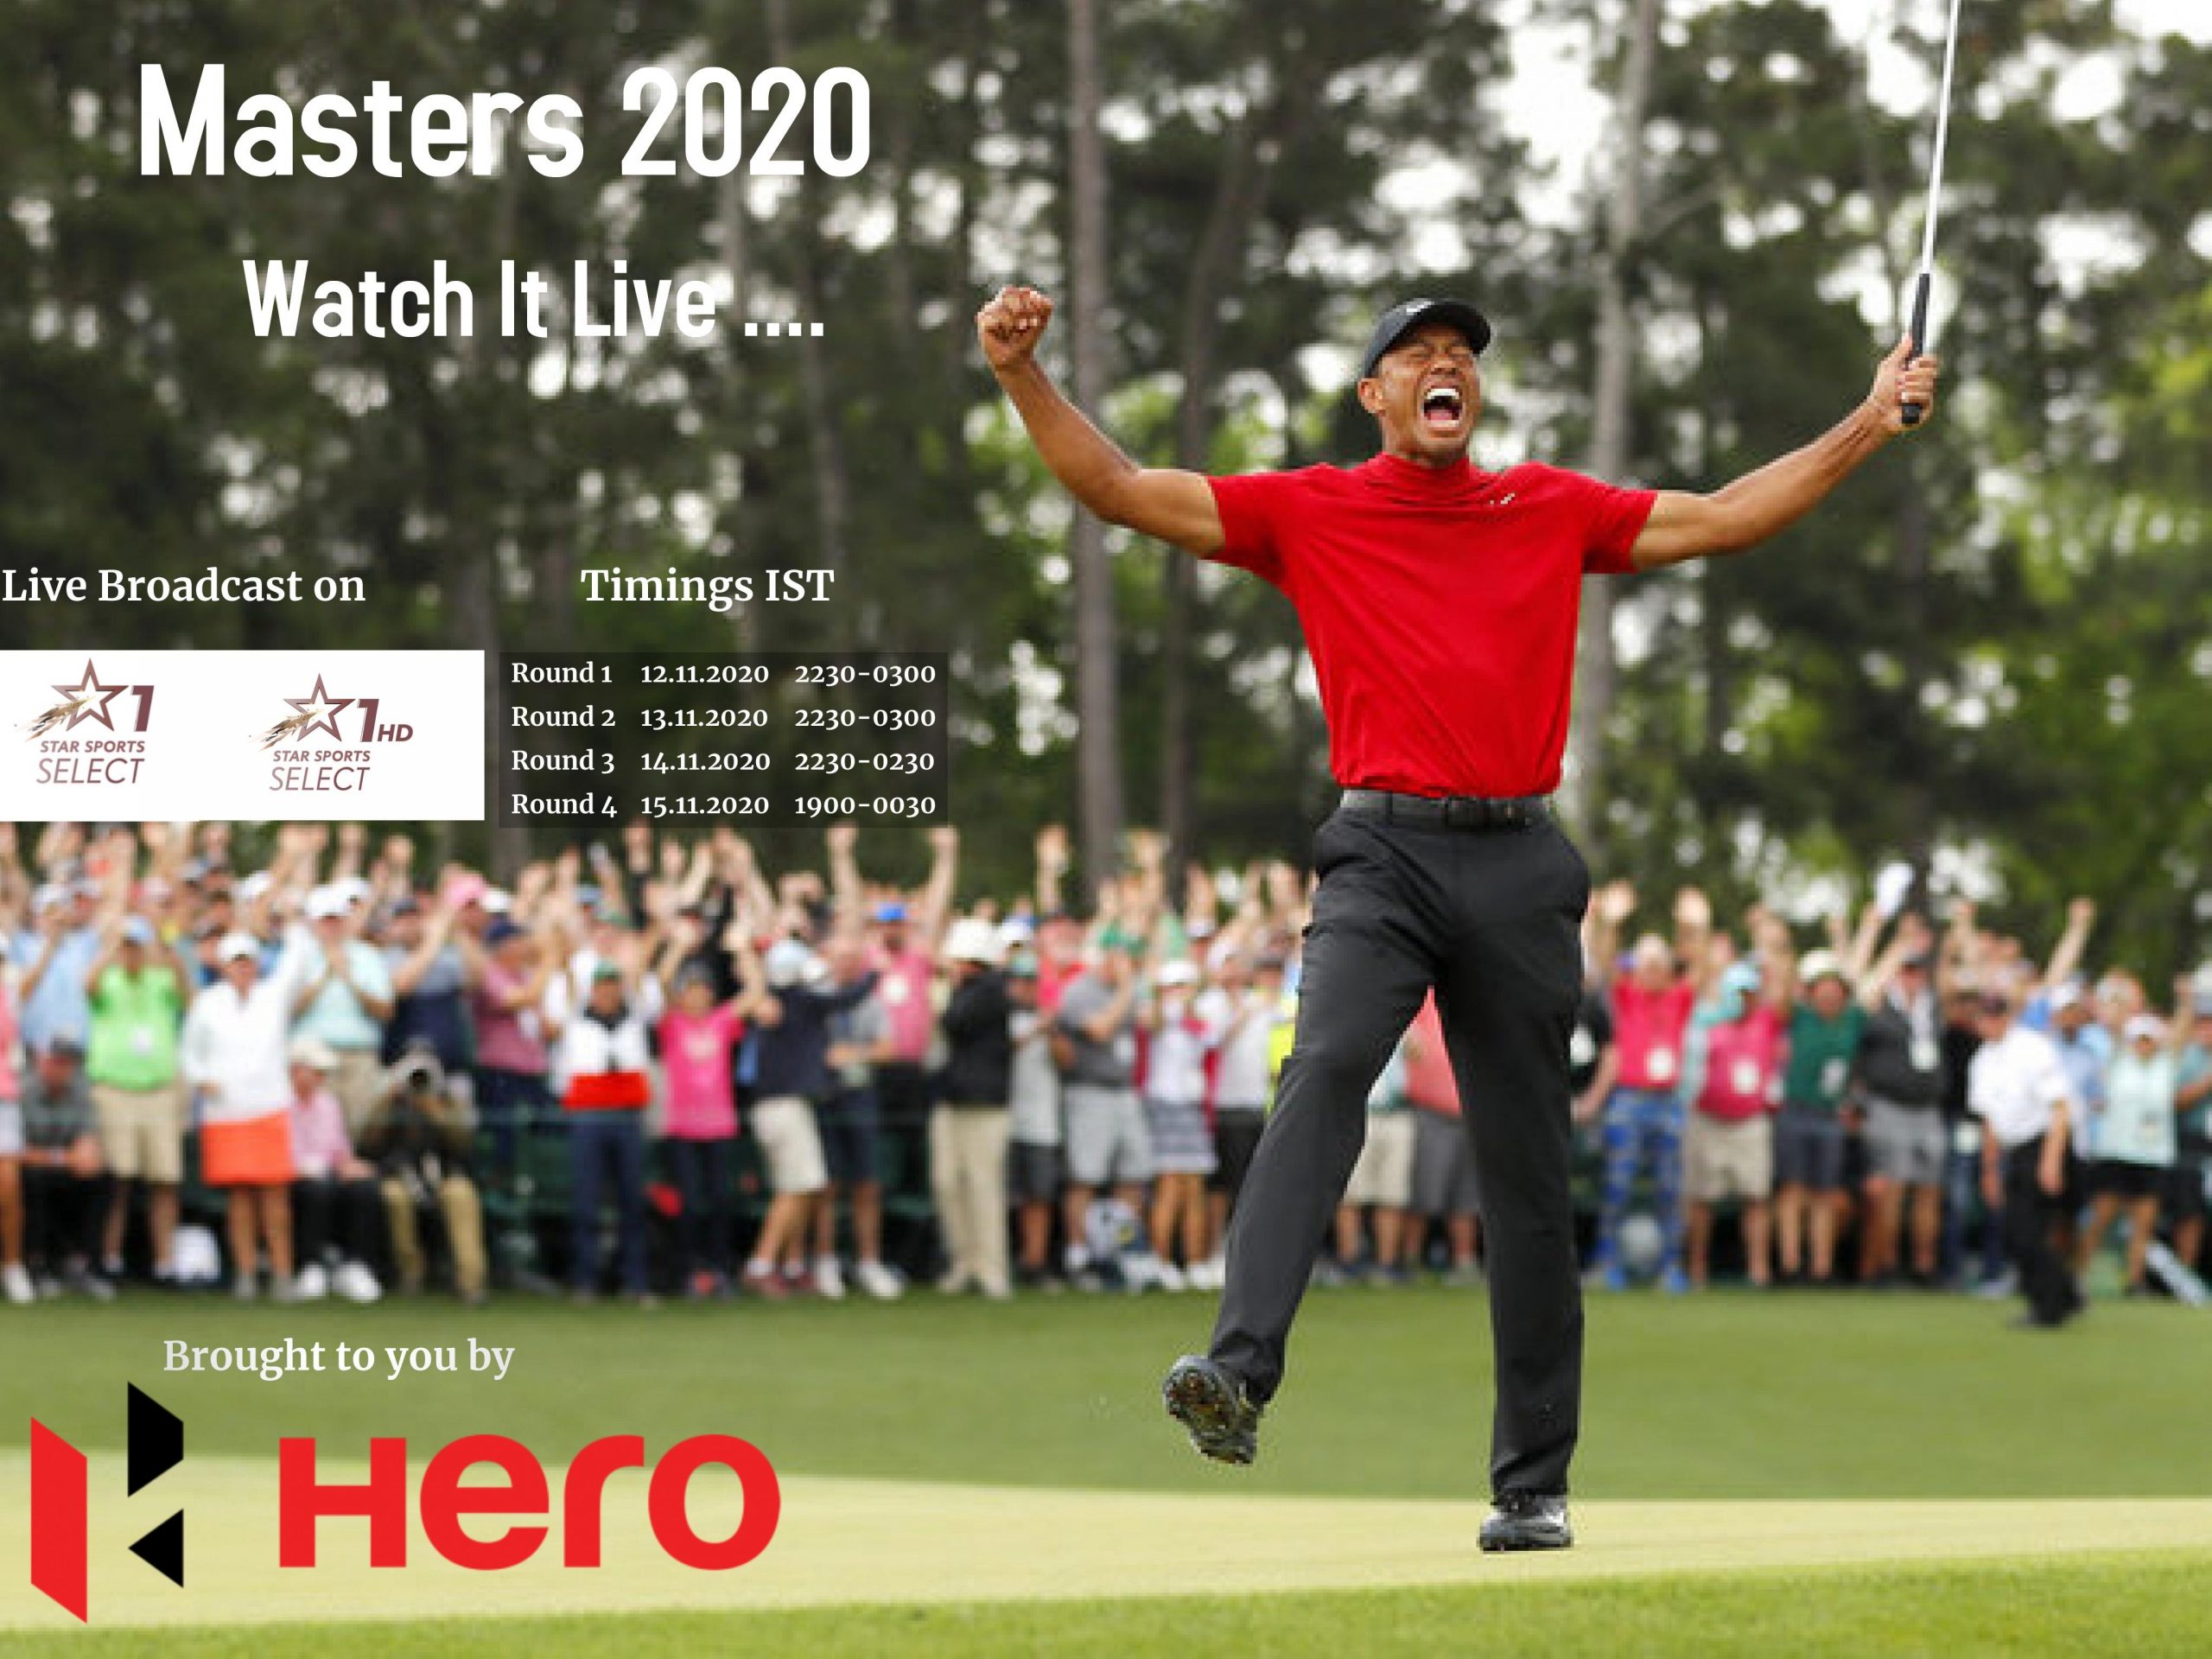 Hero MotoCorp to sponsor the broadcast of The Masters coverage in India